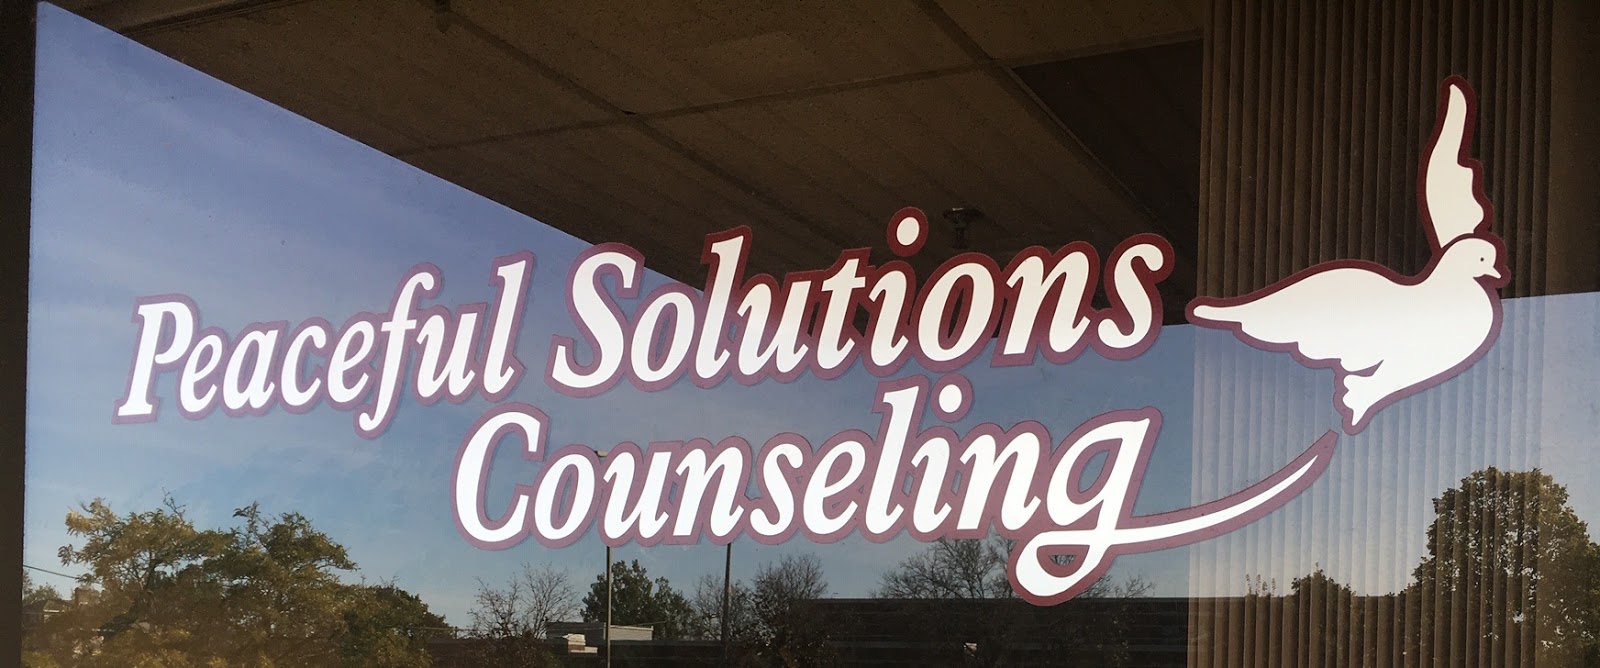 Peaceful Solutions Counseling